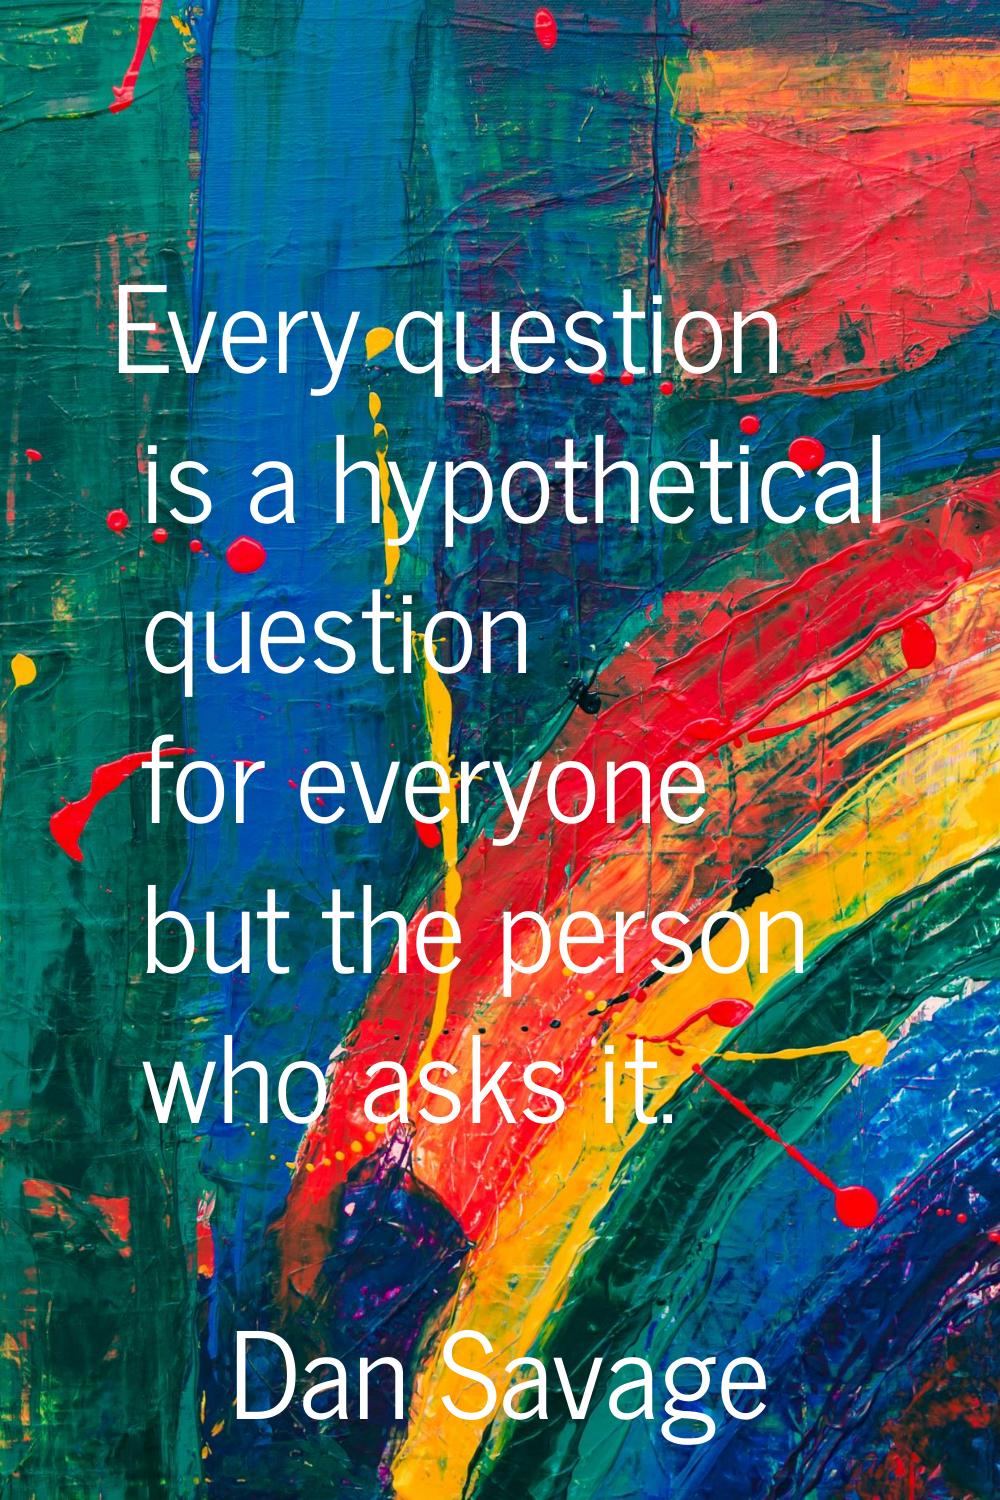 Every question is a hypothetical question for everyone but the person who asks it.